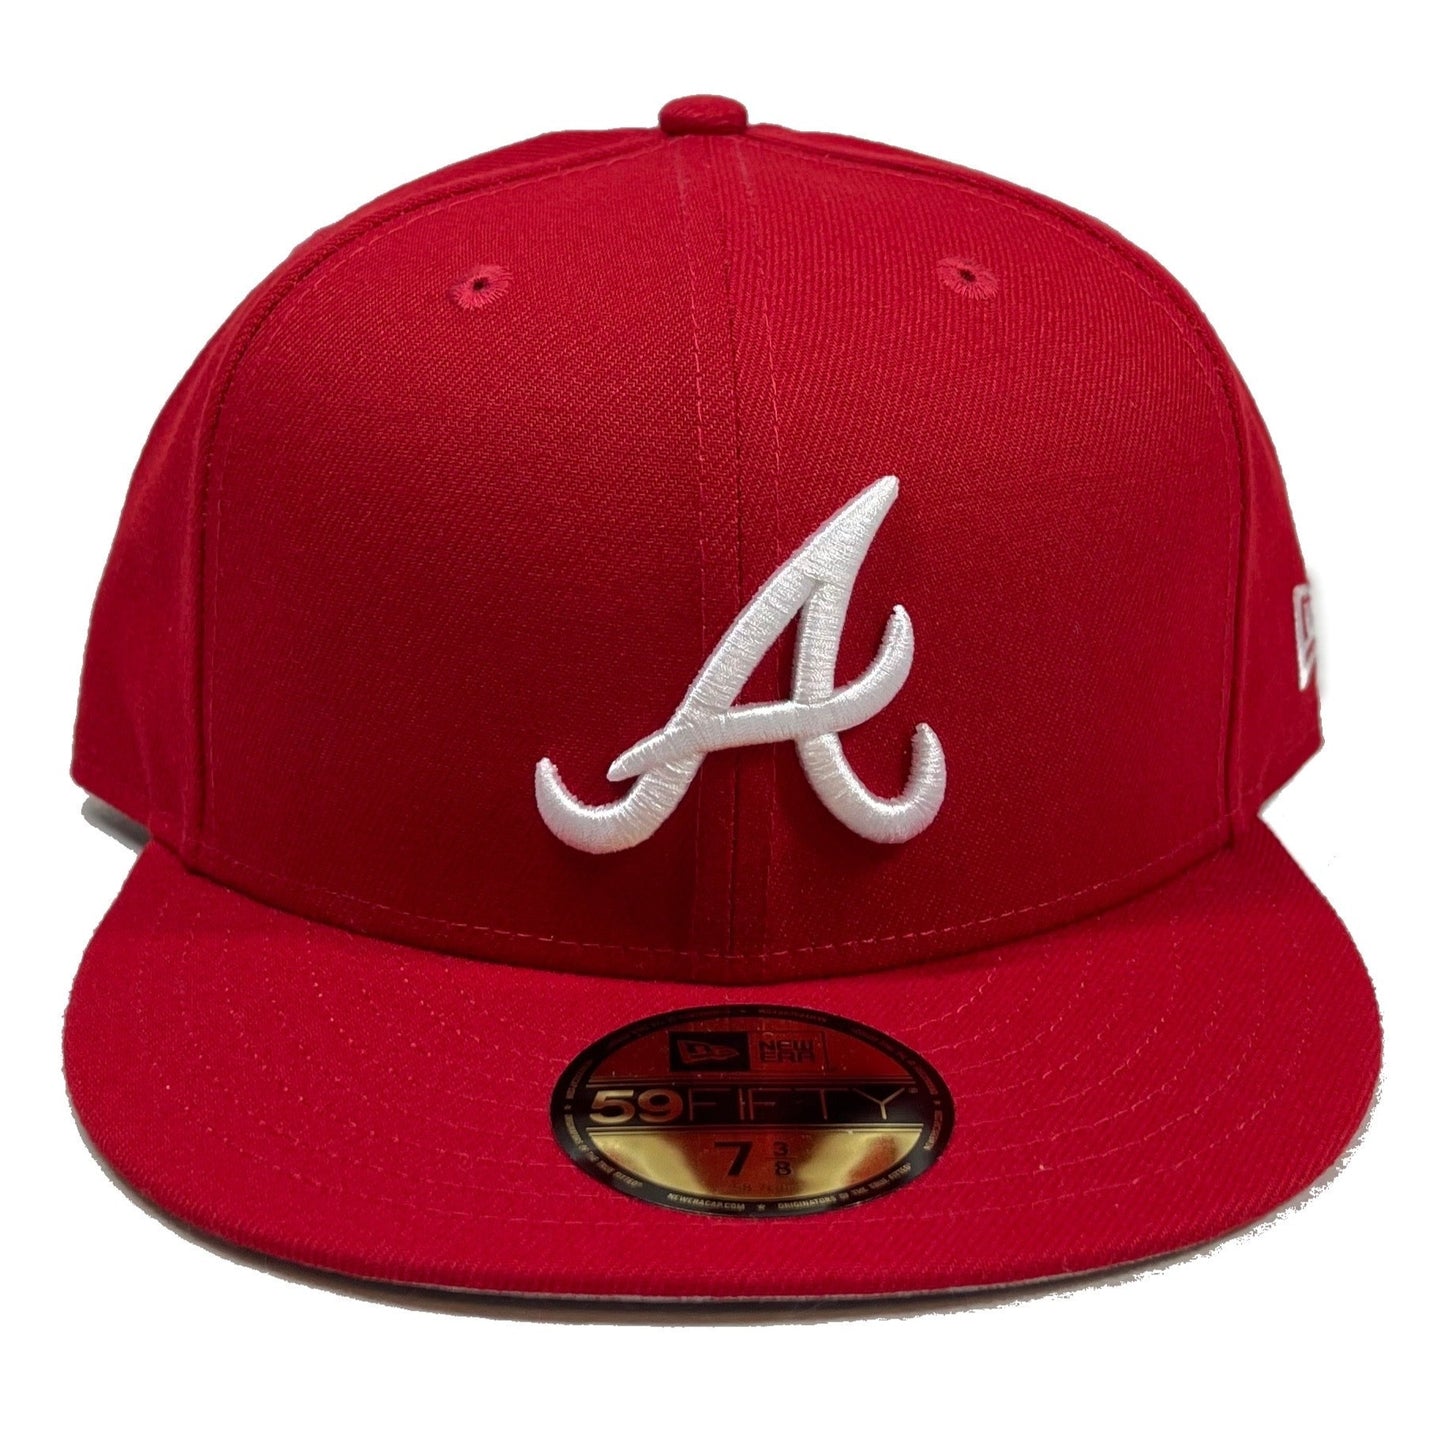 Atlanta Braves (Red) Fitted